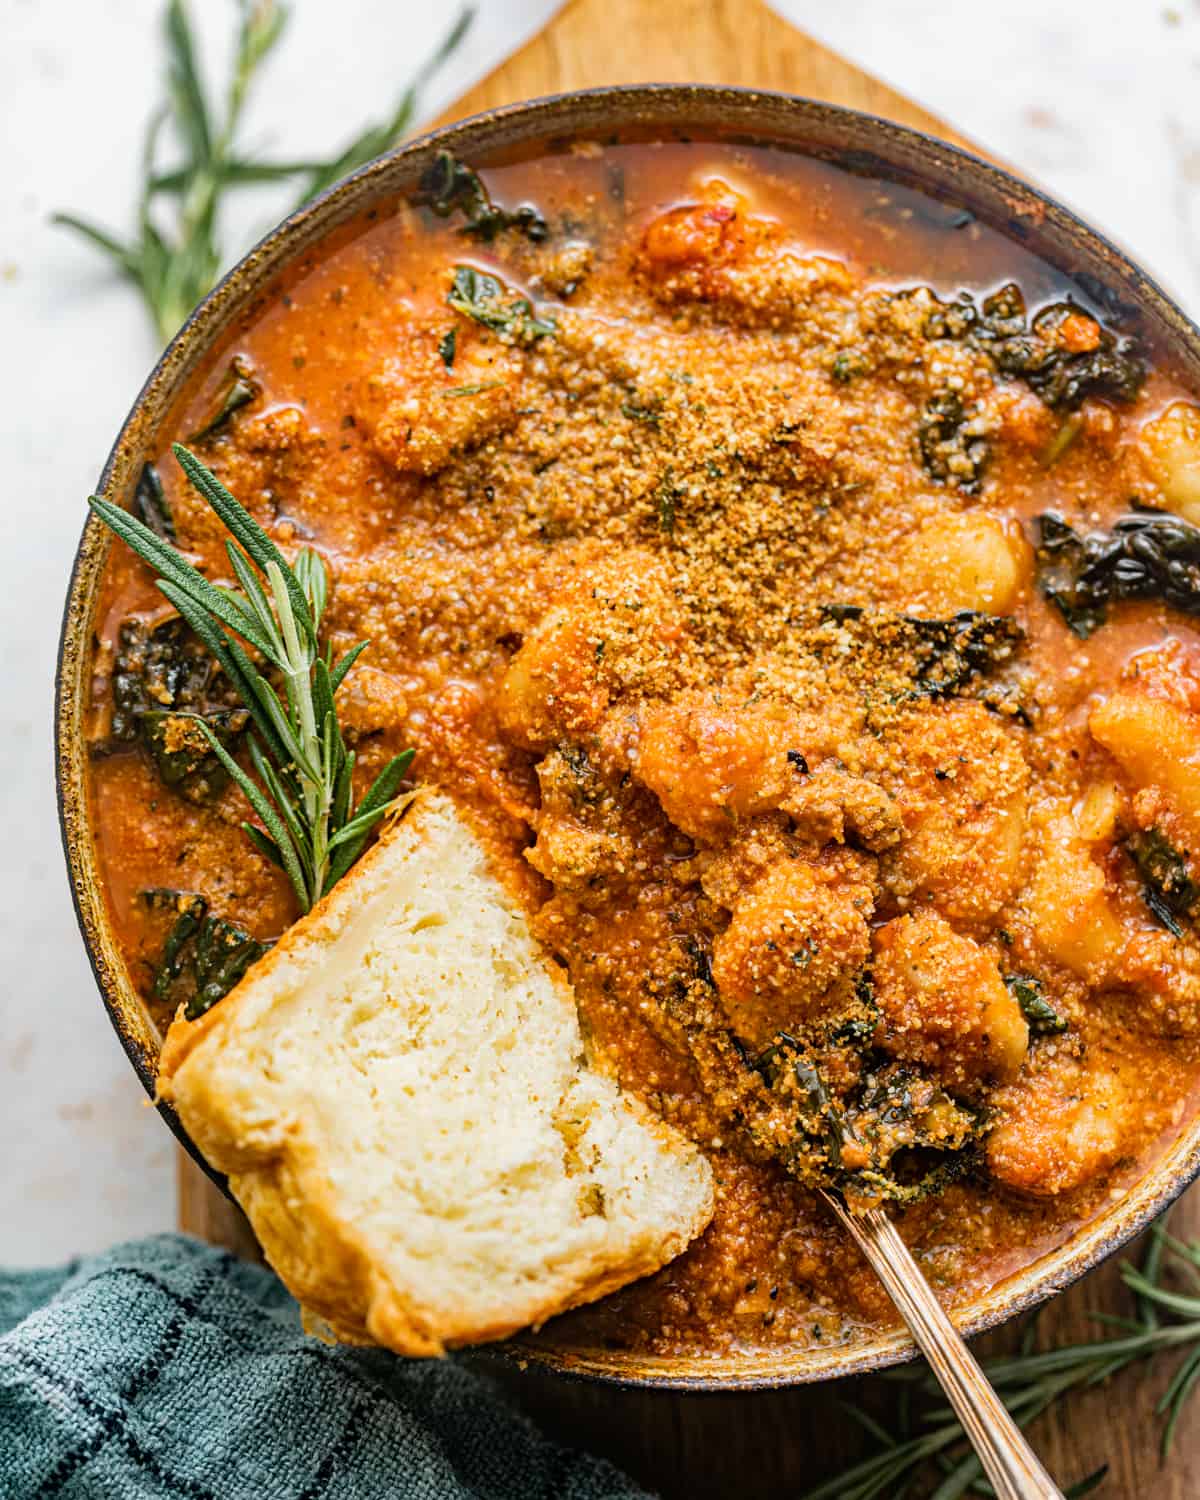 tomato gnocchi soup in a bowl with a piece of bread.